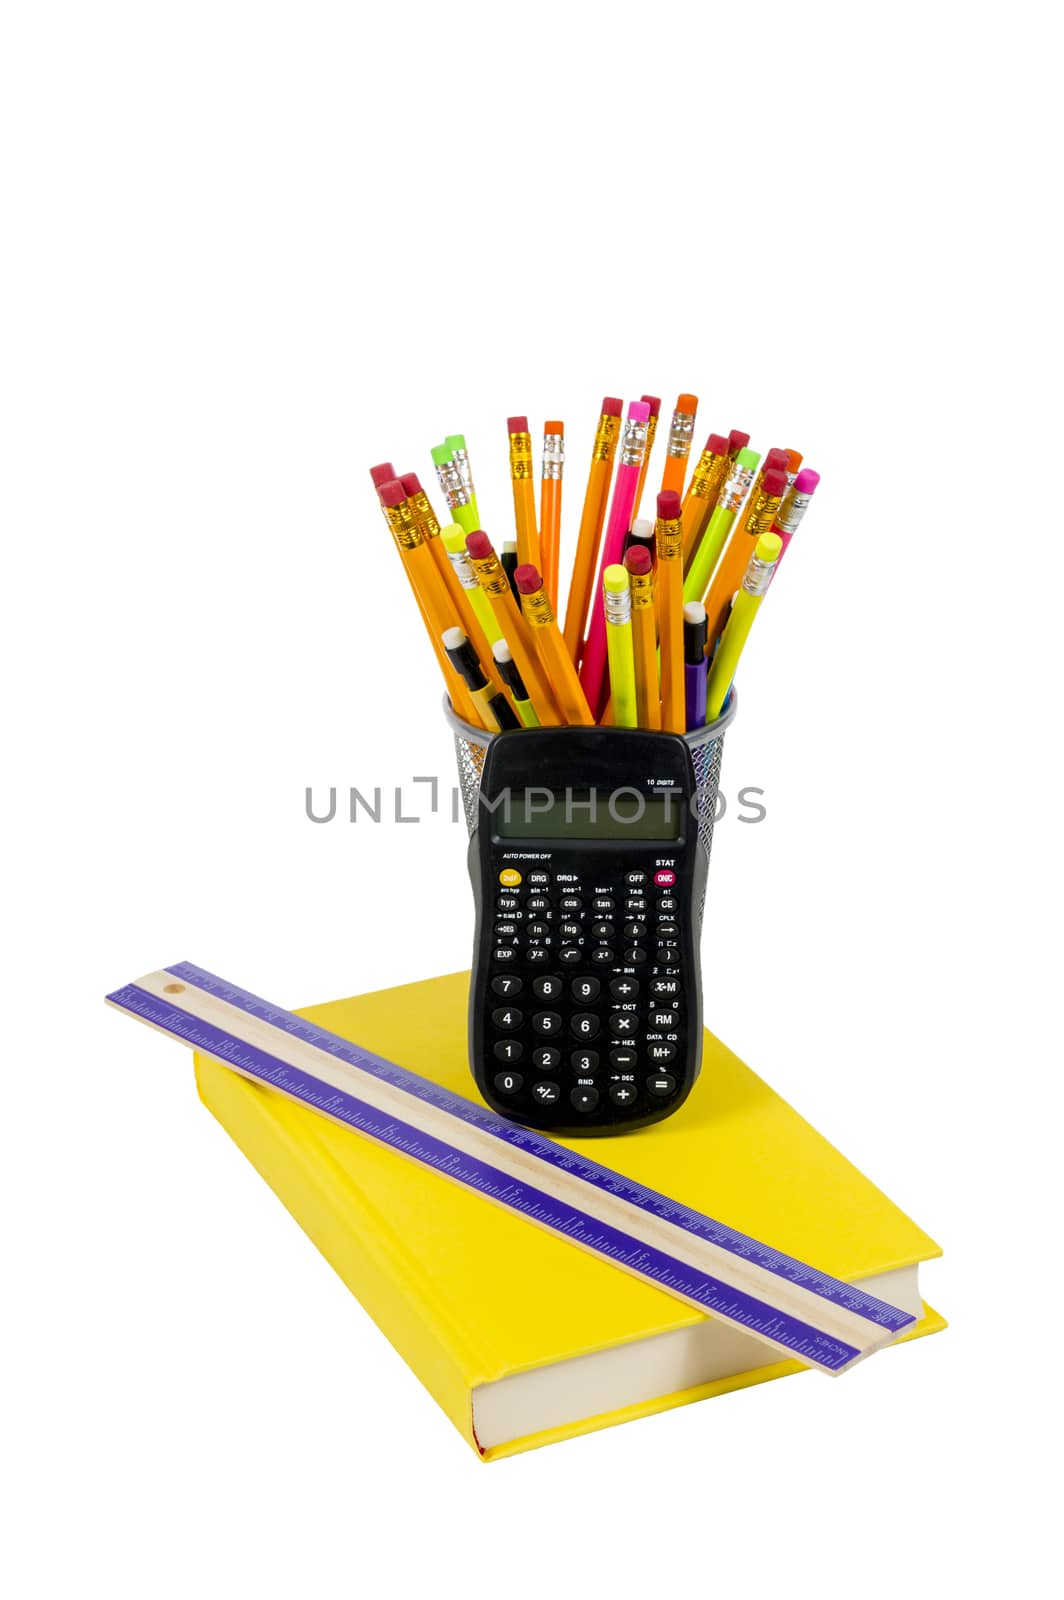 Vertical shot of brightly colored book, ruler, calculator and pencils in holder.